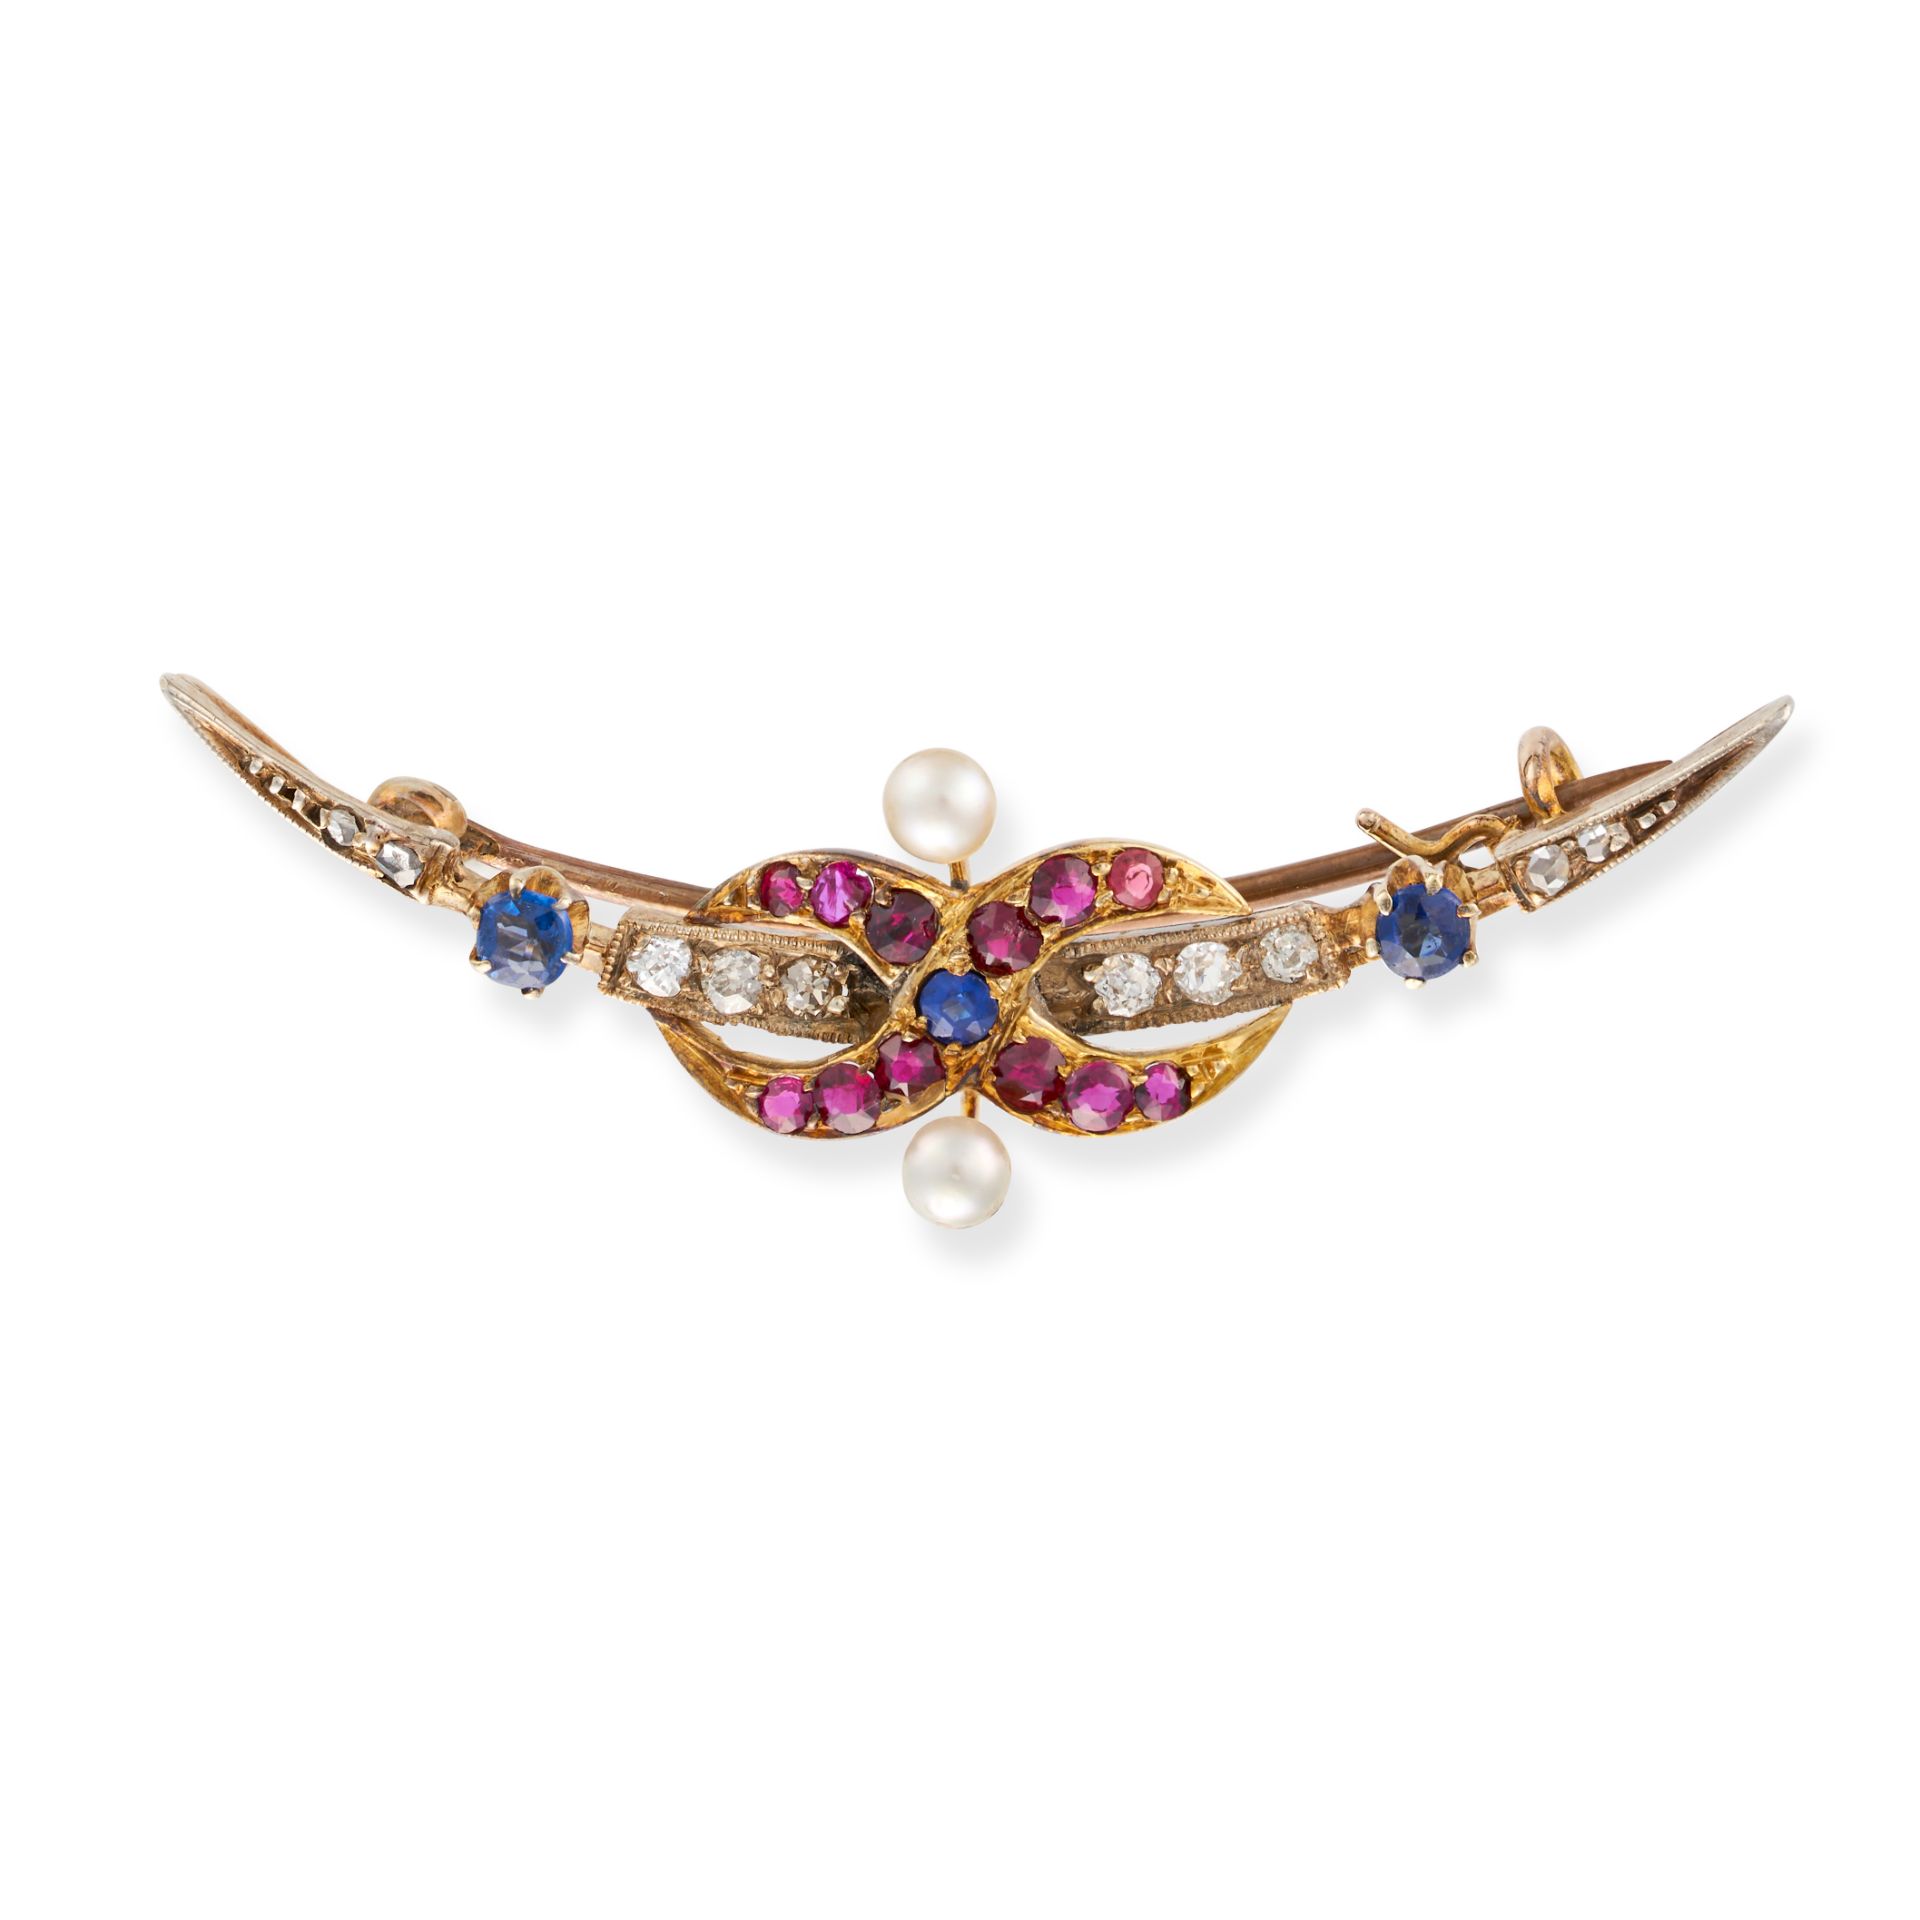 AN ANTIQUE DIAMOND, RUBY, SAPPHIRE AND PEARL CRESCENT MOON BROOCH in yellow gold and silver, desi...